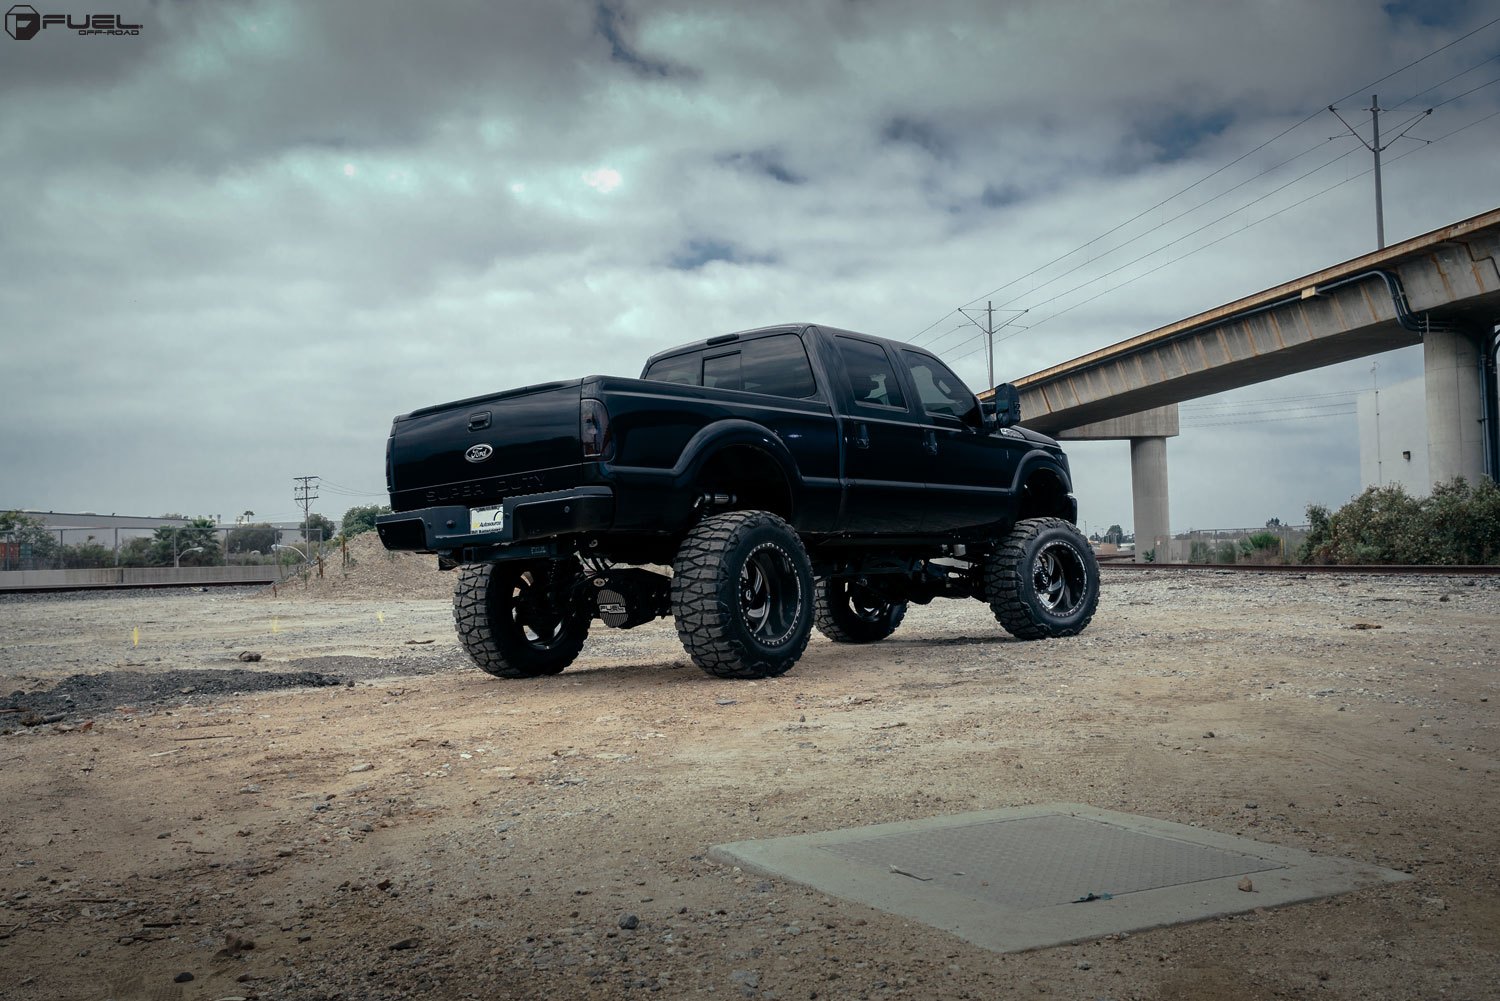 Aftermarket Rear Bumper on Black Ford F-350 Super Duty - Photo by Fuel Offroad